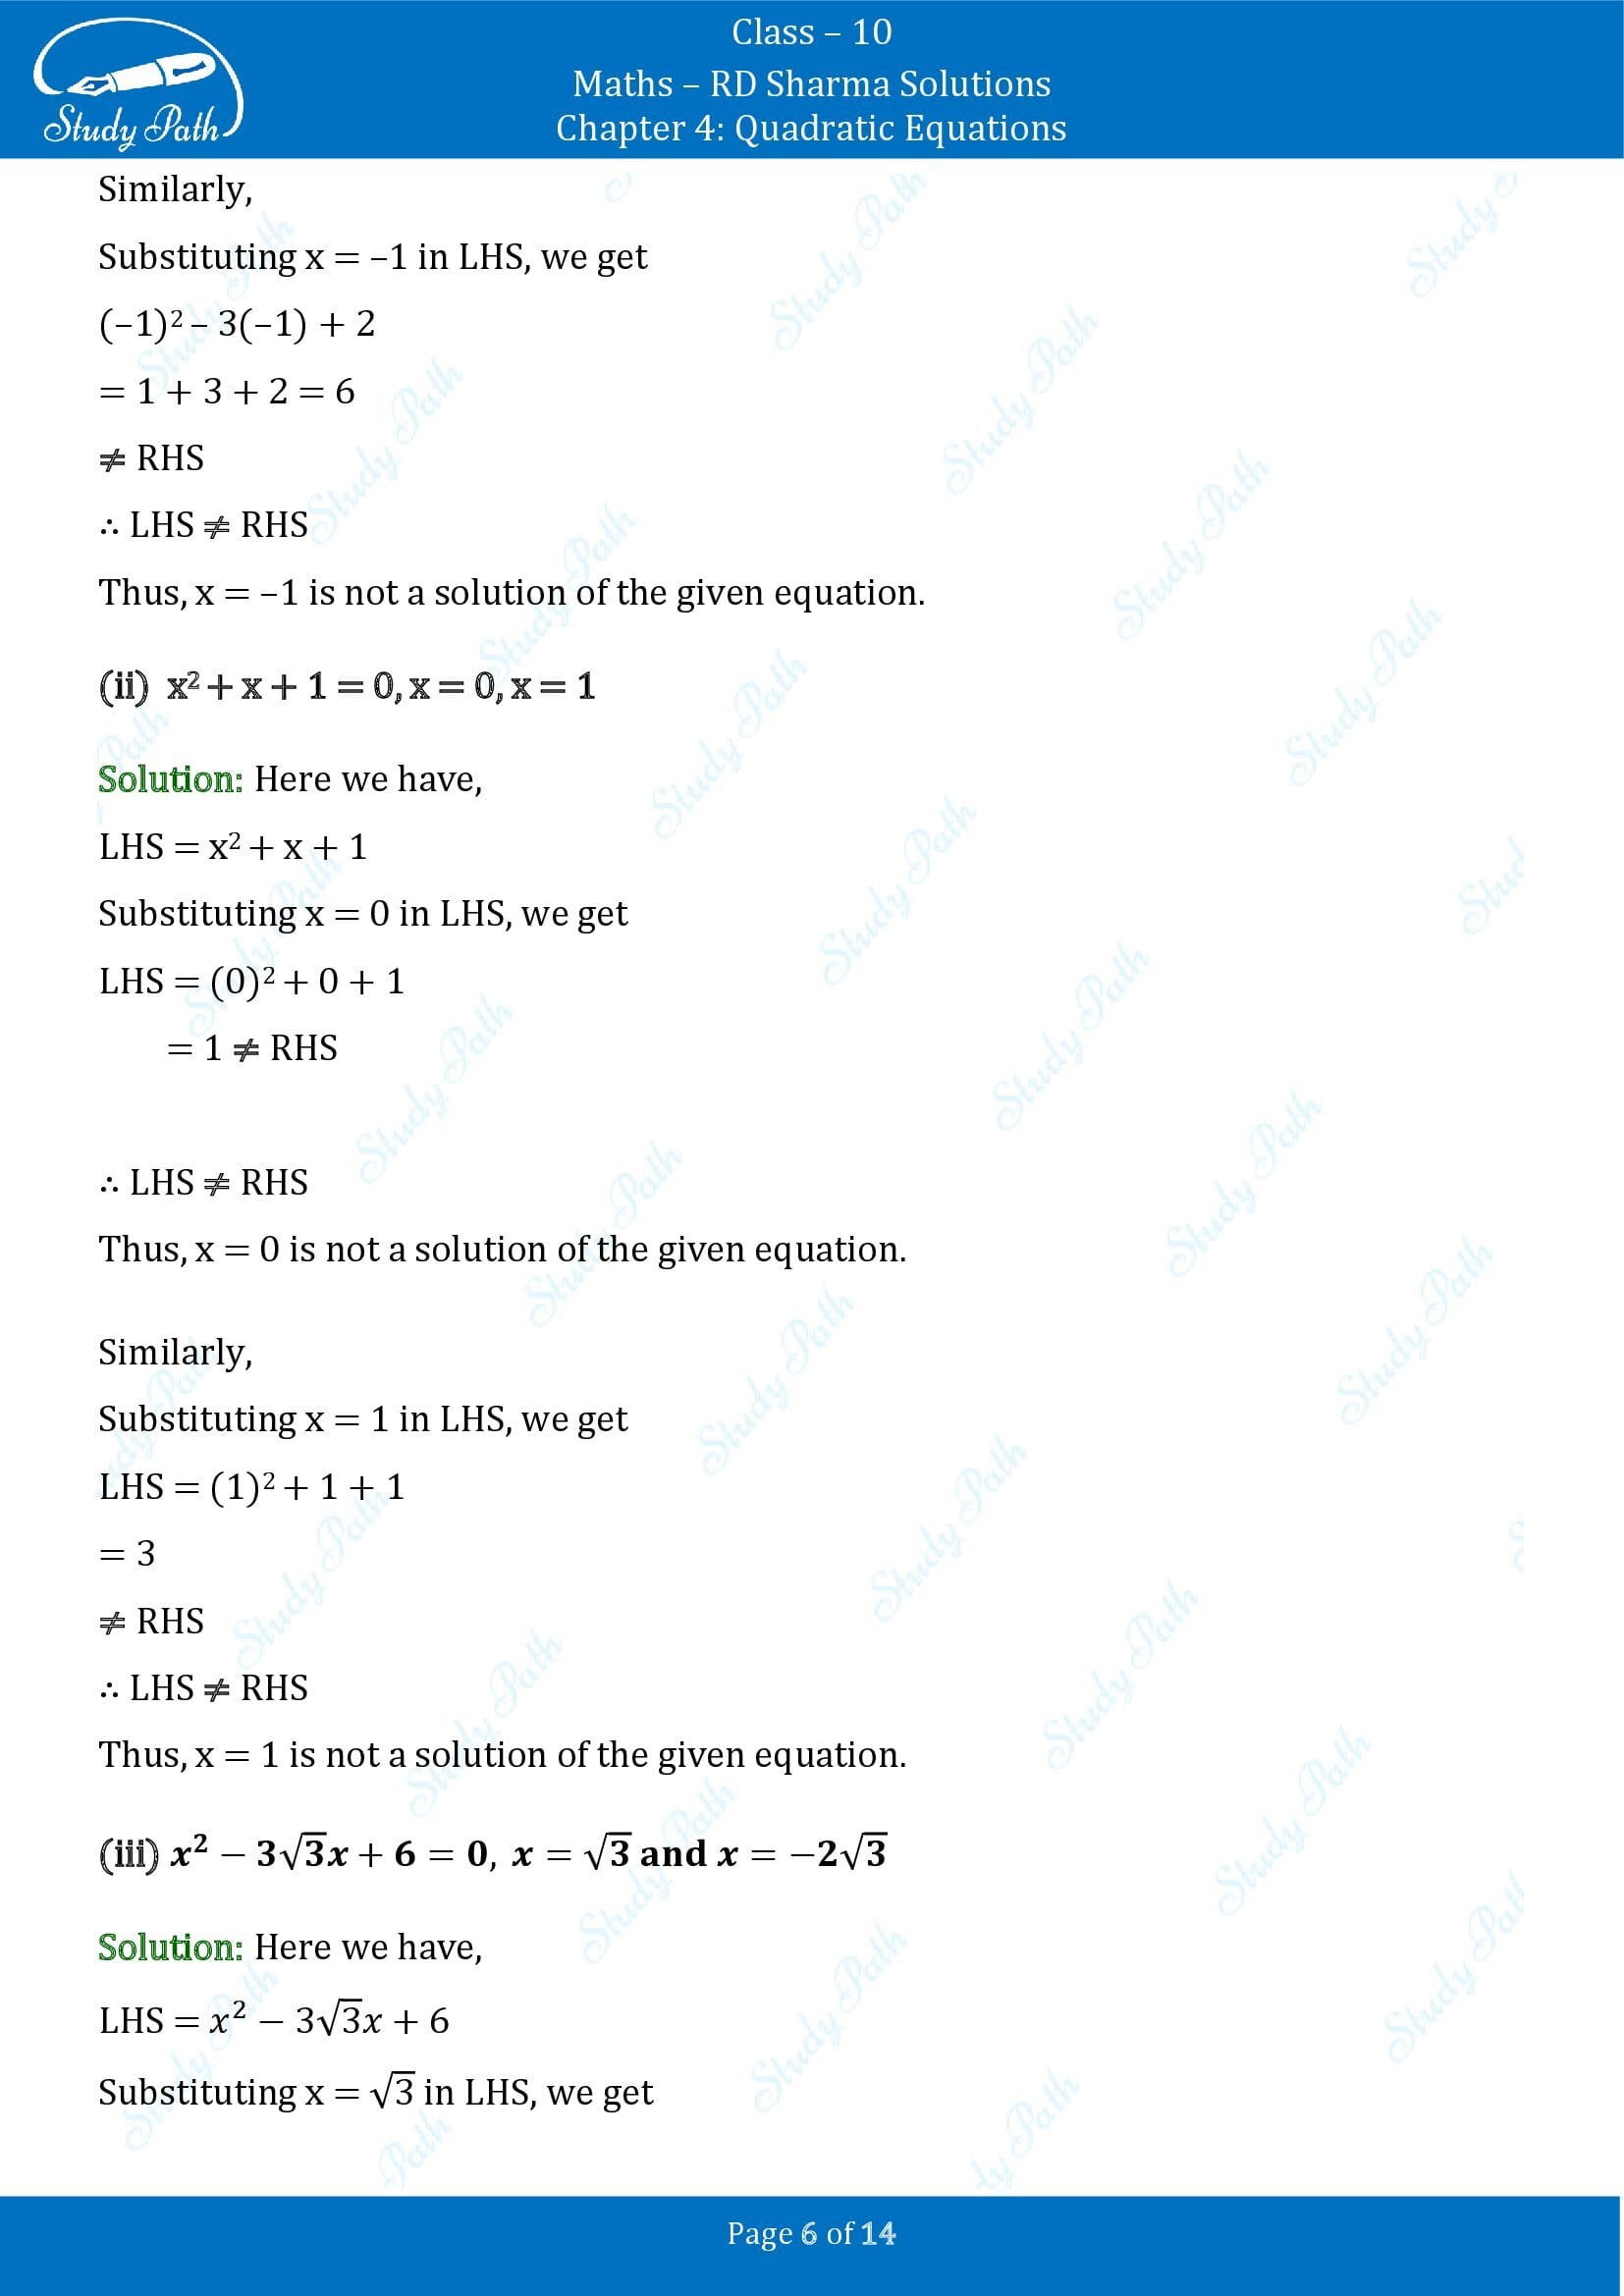 RD Sharma Solutions Class 10 Chapter 4 Quadratic Equations Exercise 4.1 00006